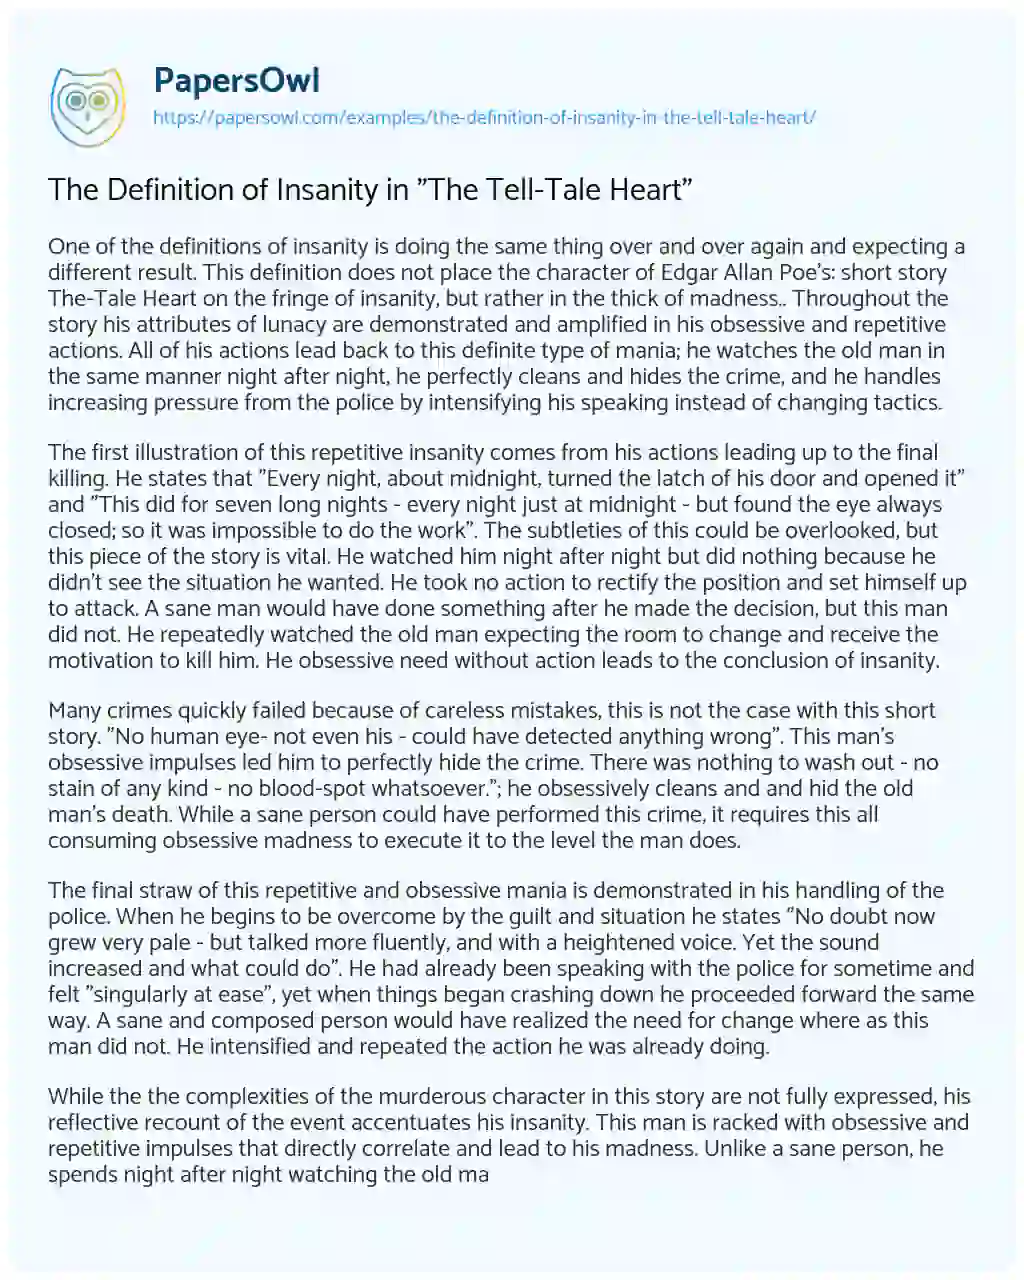 Essay on The Definition of Insanity in “The Tell-Tale Heart”